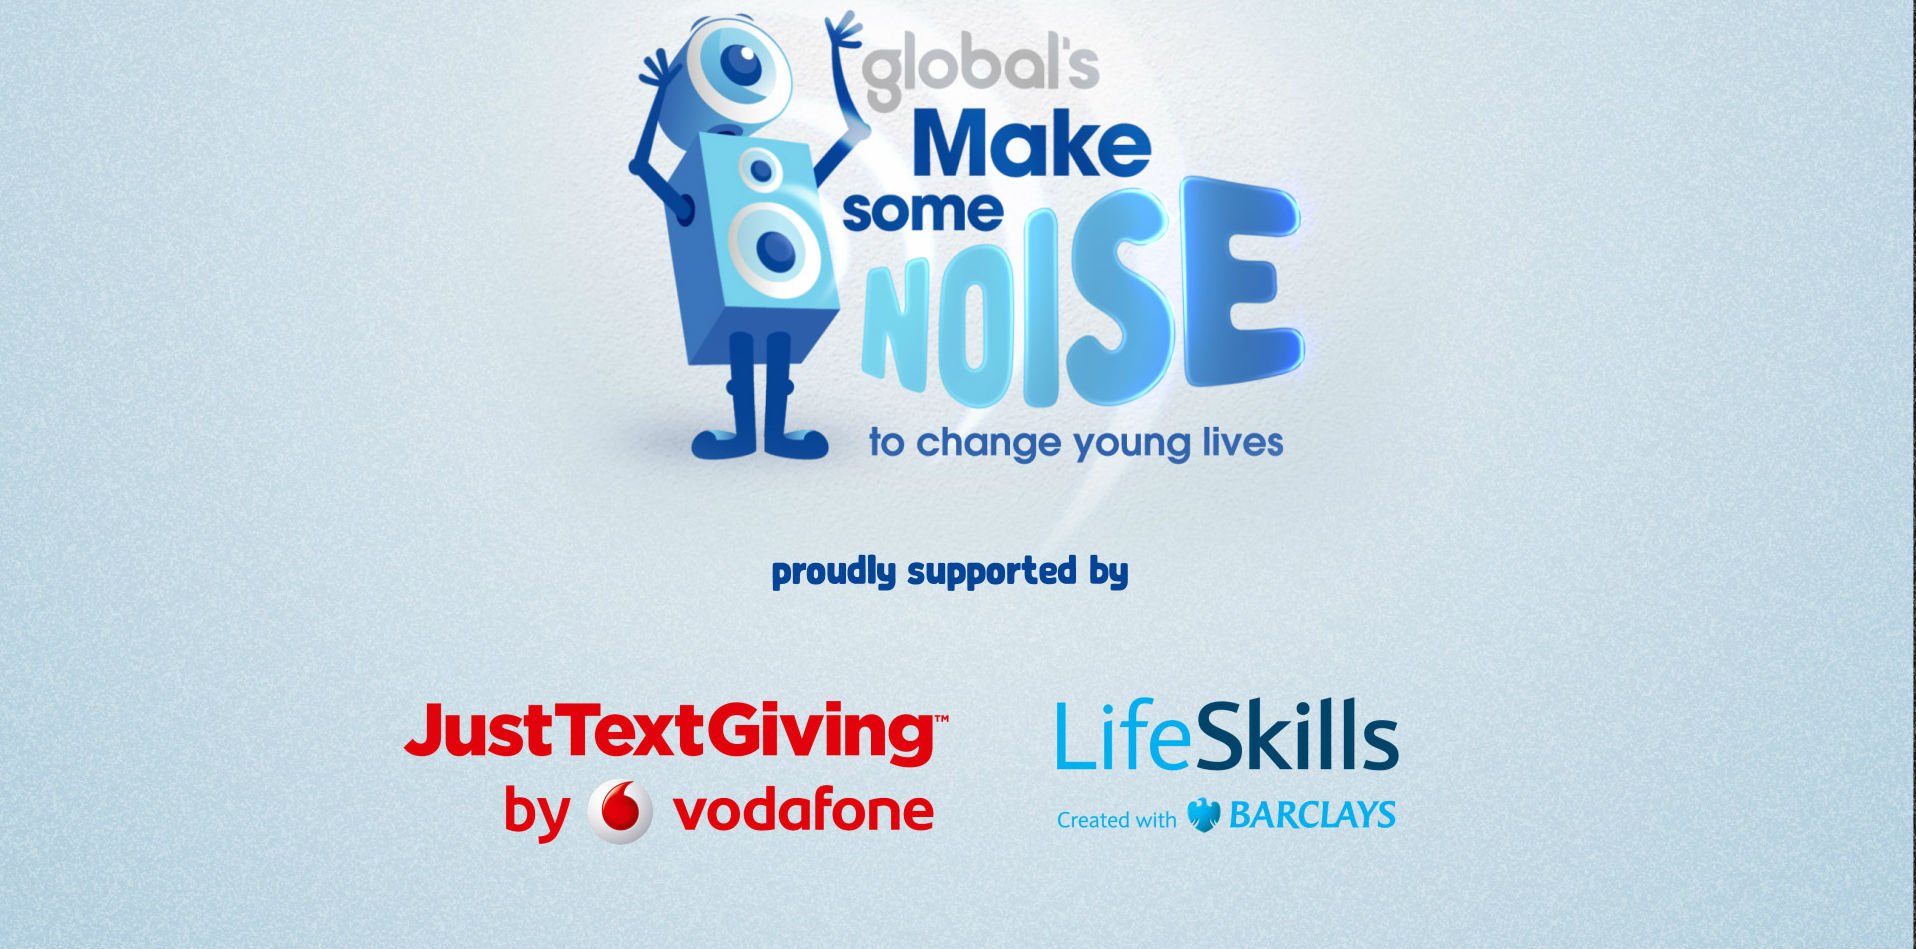 A Huge Thank You To Our Sponsors JustTextGiving by Vodafone and LifeSkills created with Barclays